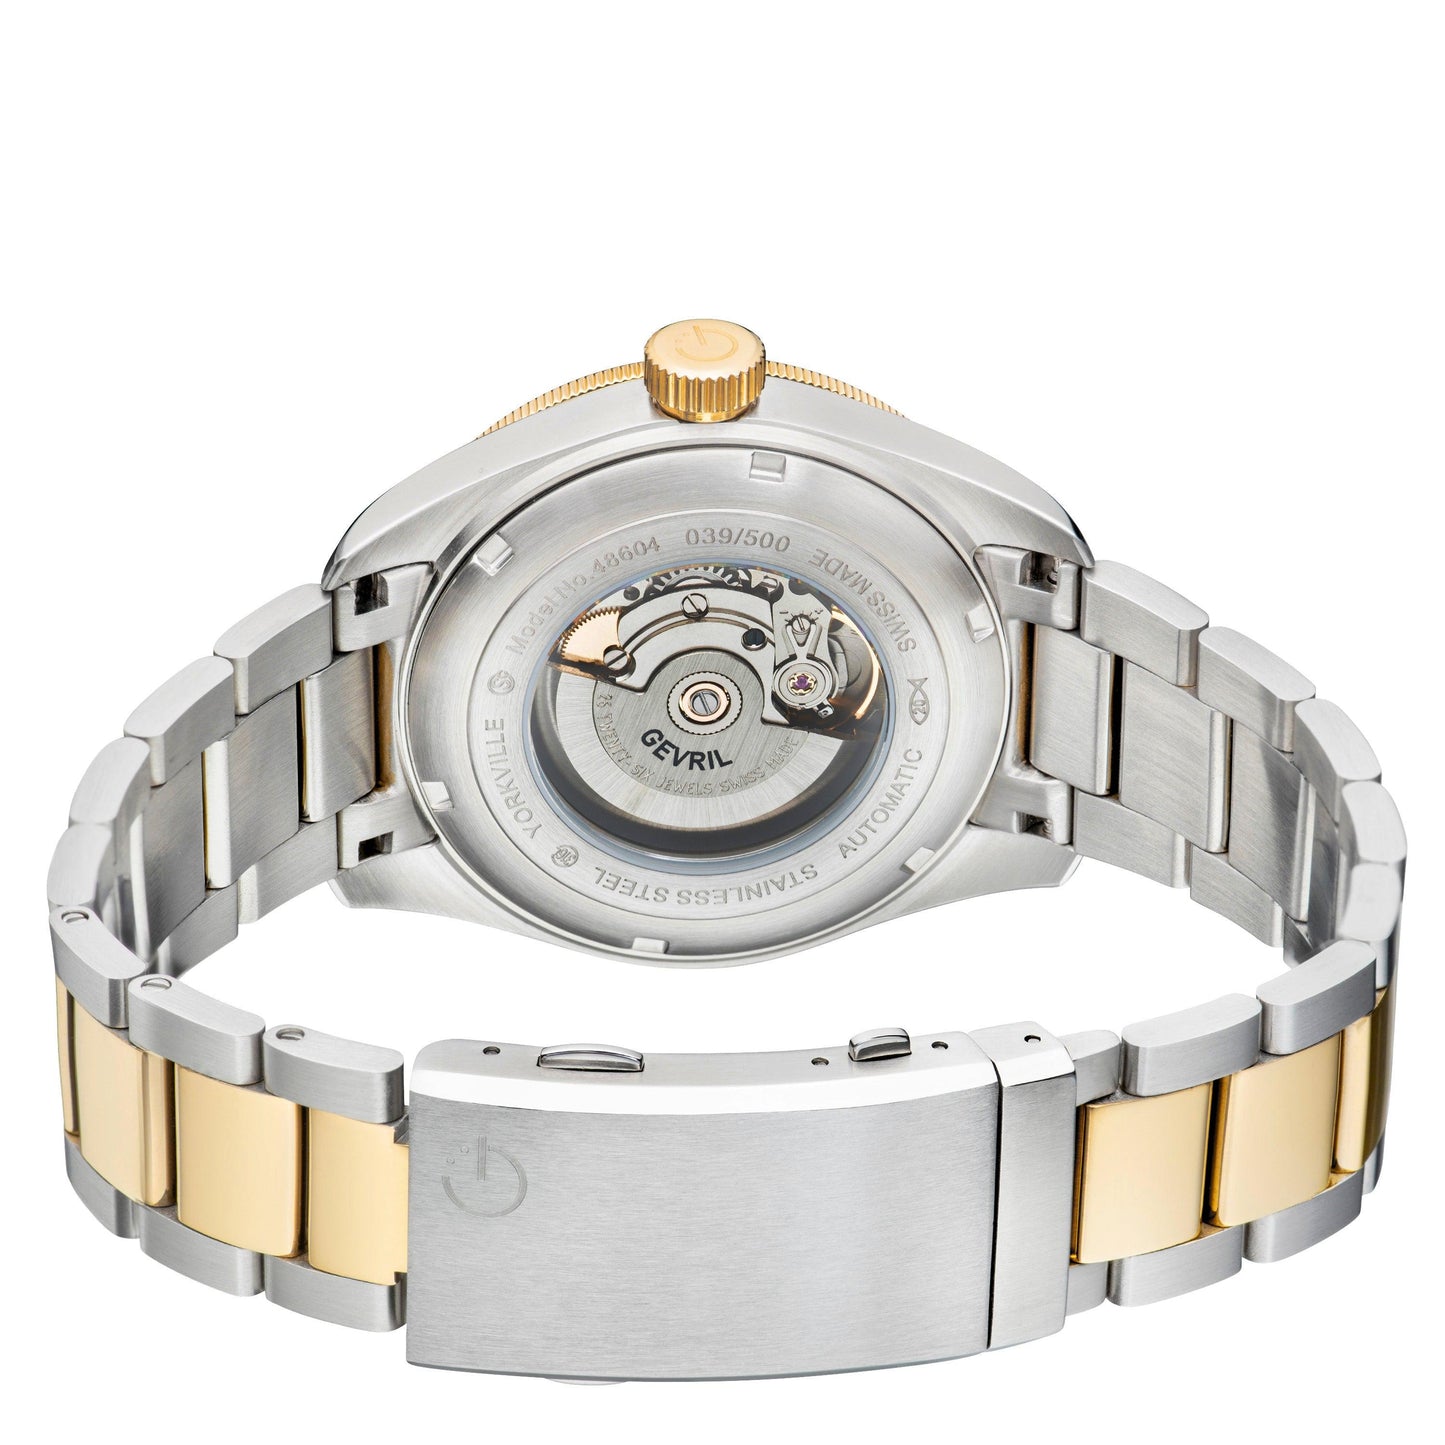 Gevril-Luxury-Swiss-Watches-Gevril Yorkville Automatic-48604